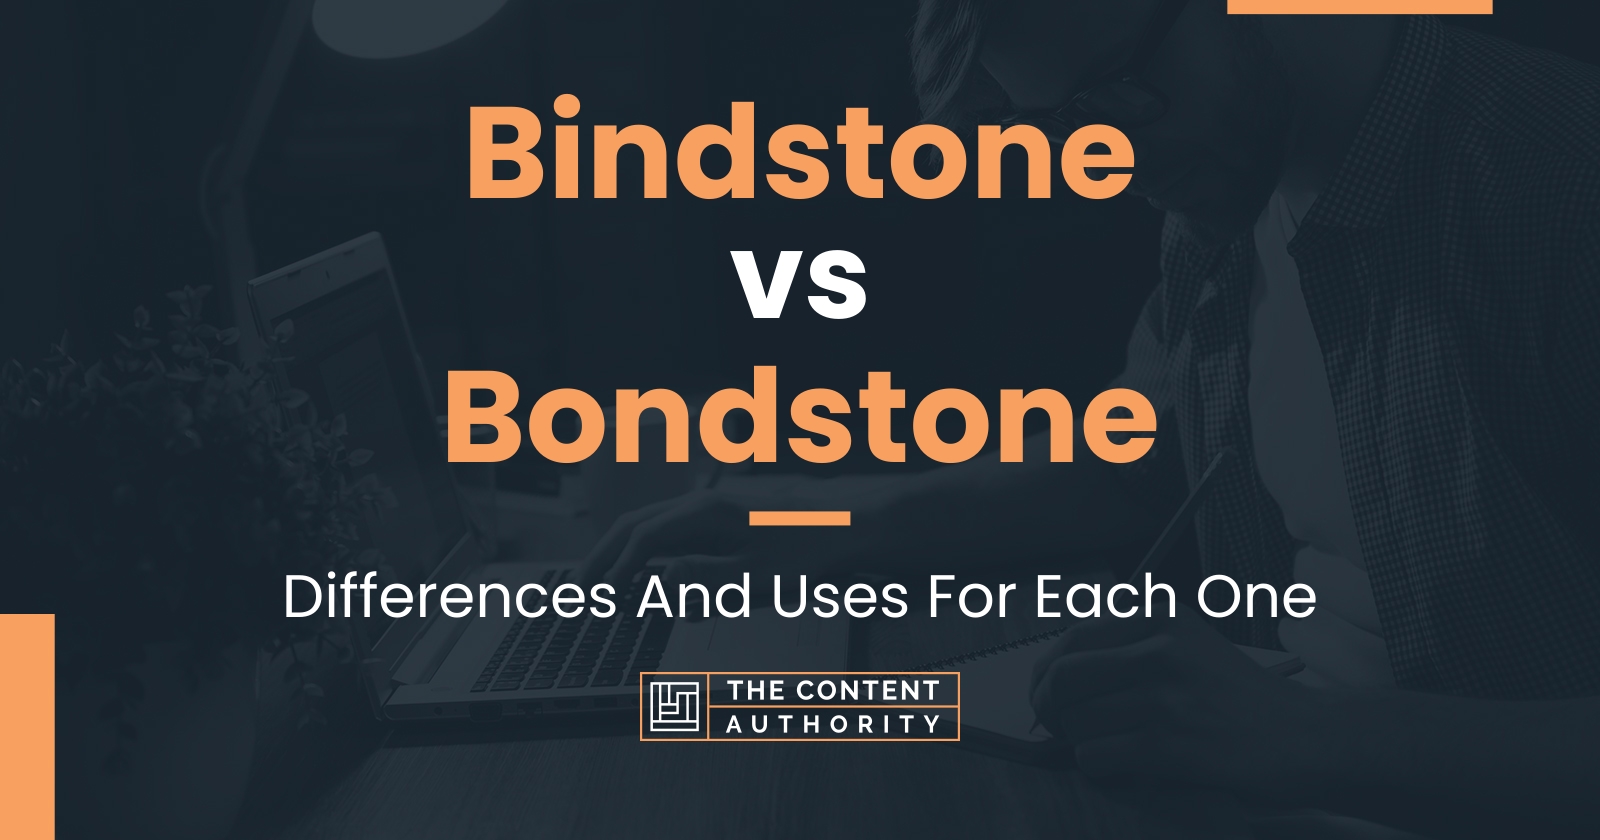 Bindstone vs Bondstone: Differences And Uses For Each One